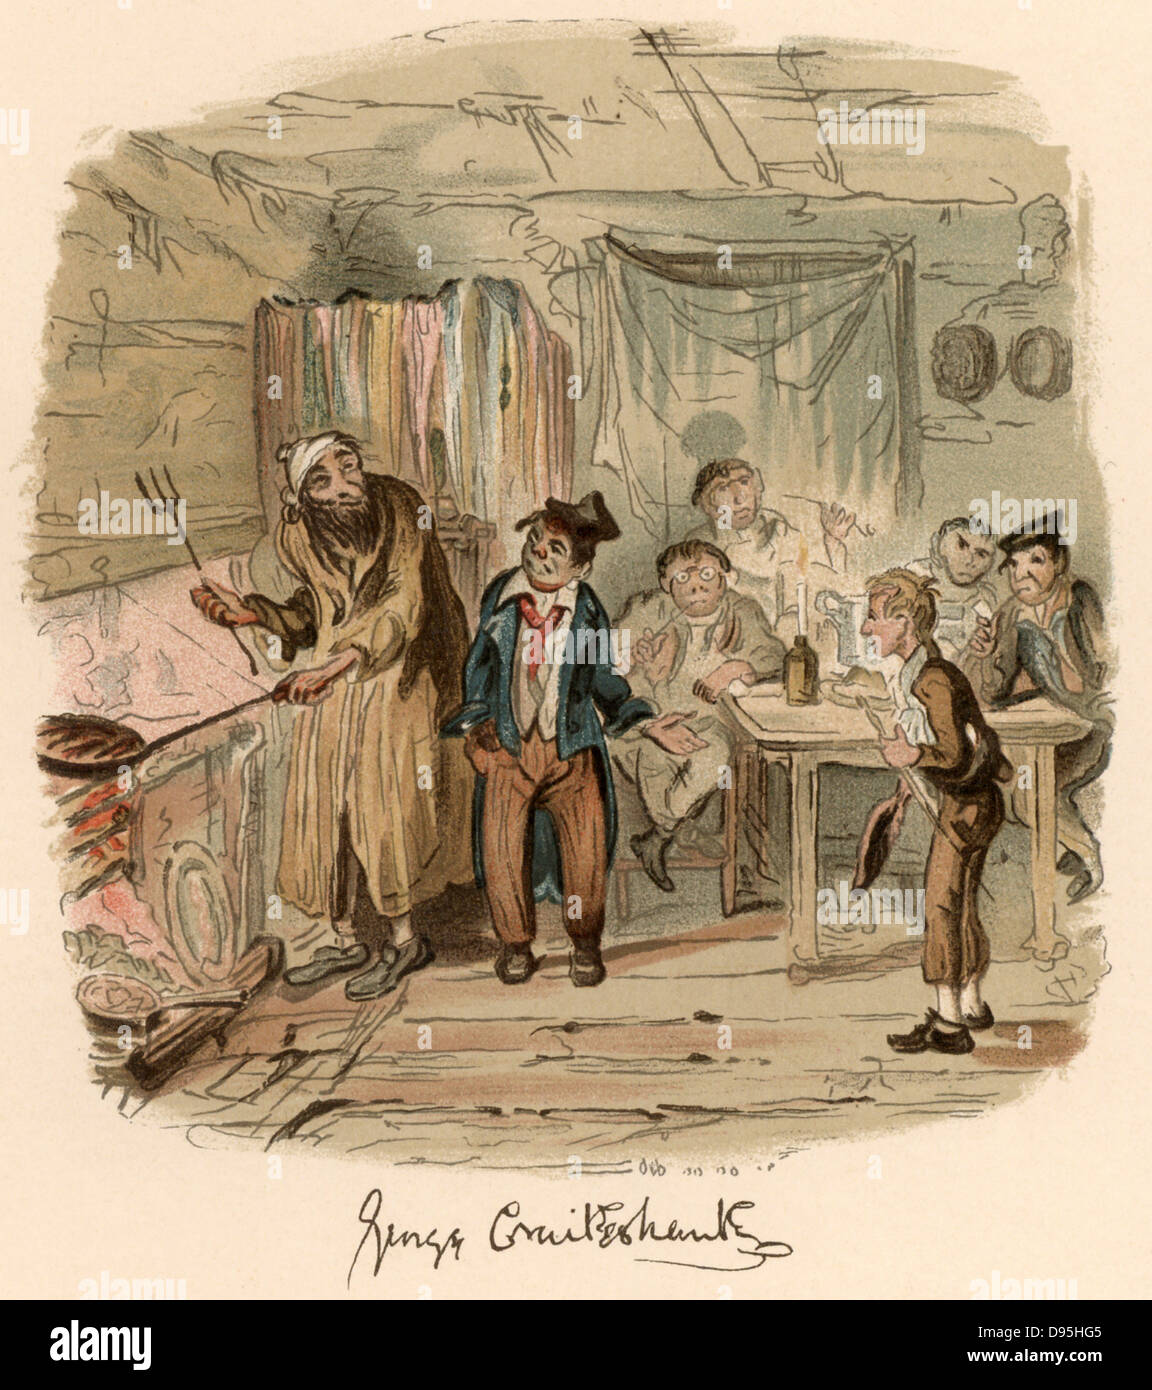 Scene from the novel 'Oliver Twist' by Charles Dickens originally published  1837-1839. Illustration by George Cruikshank (1792-1878) showing Oliver, in  front of table, a hesitant new boy in the thieves' kitchen where